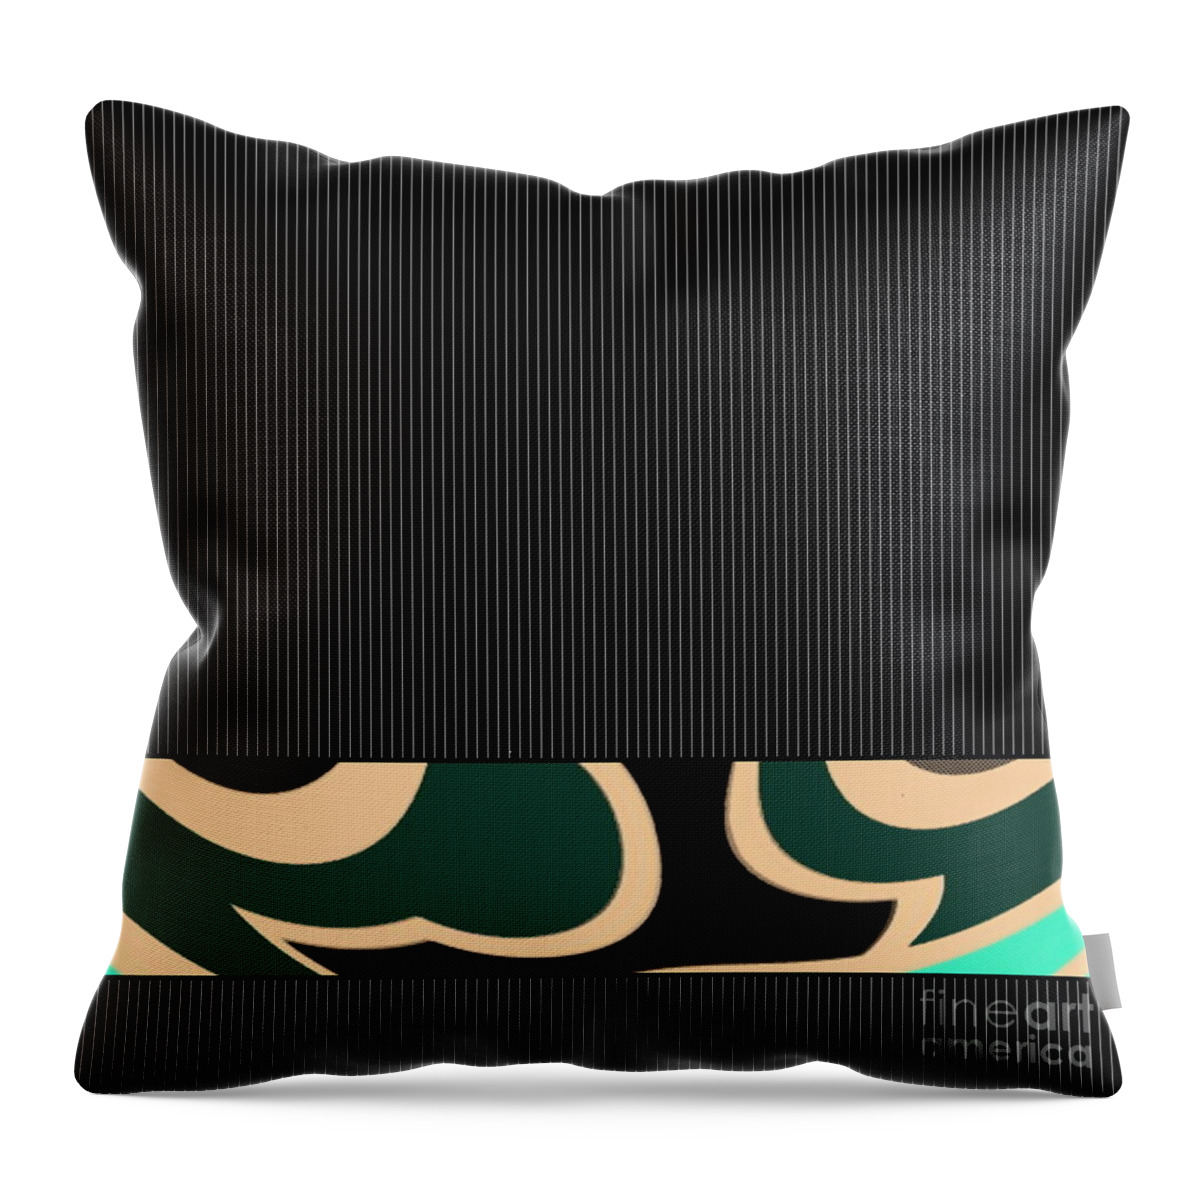  Throw Pillow featuring the digital art Troubled #2 by Designs By L